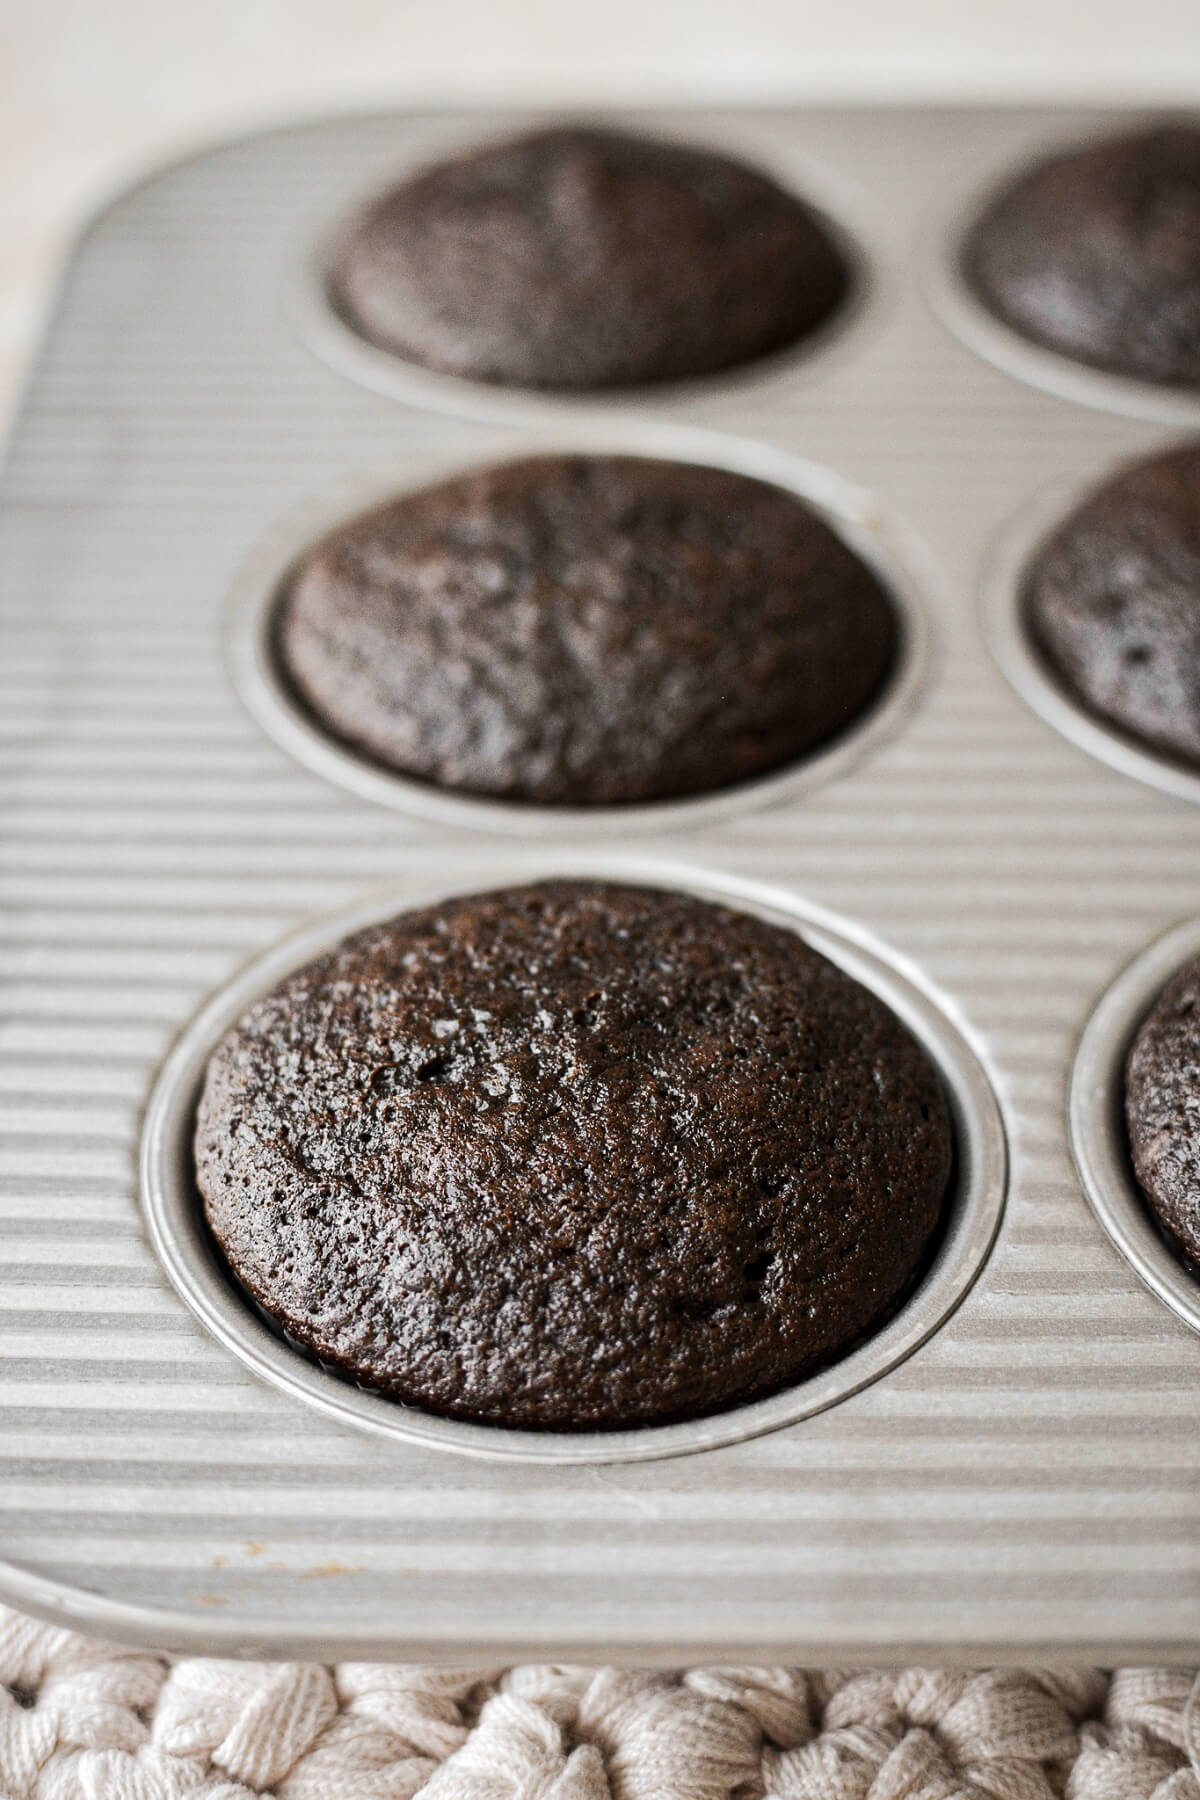 Chocolate cupcakes cooling in a muffin pan.